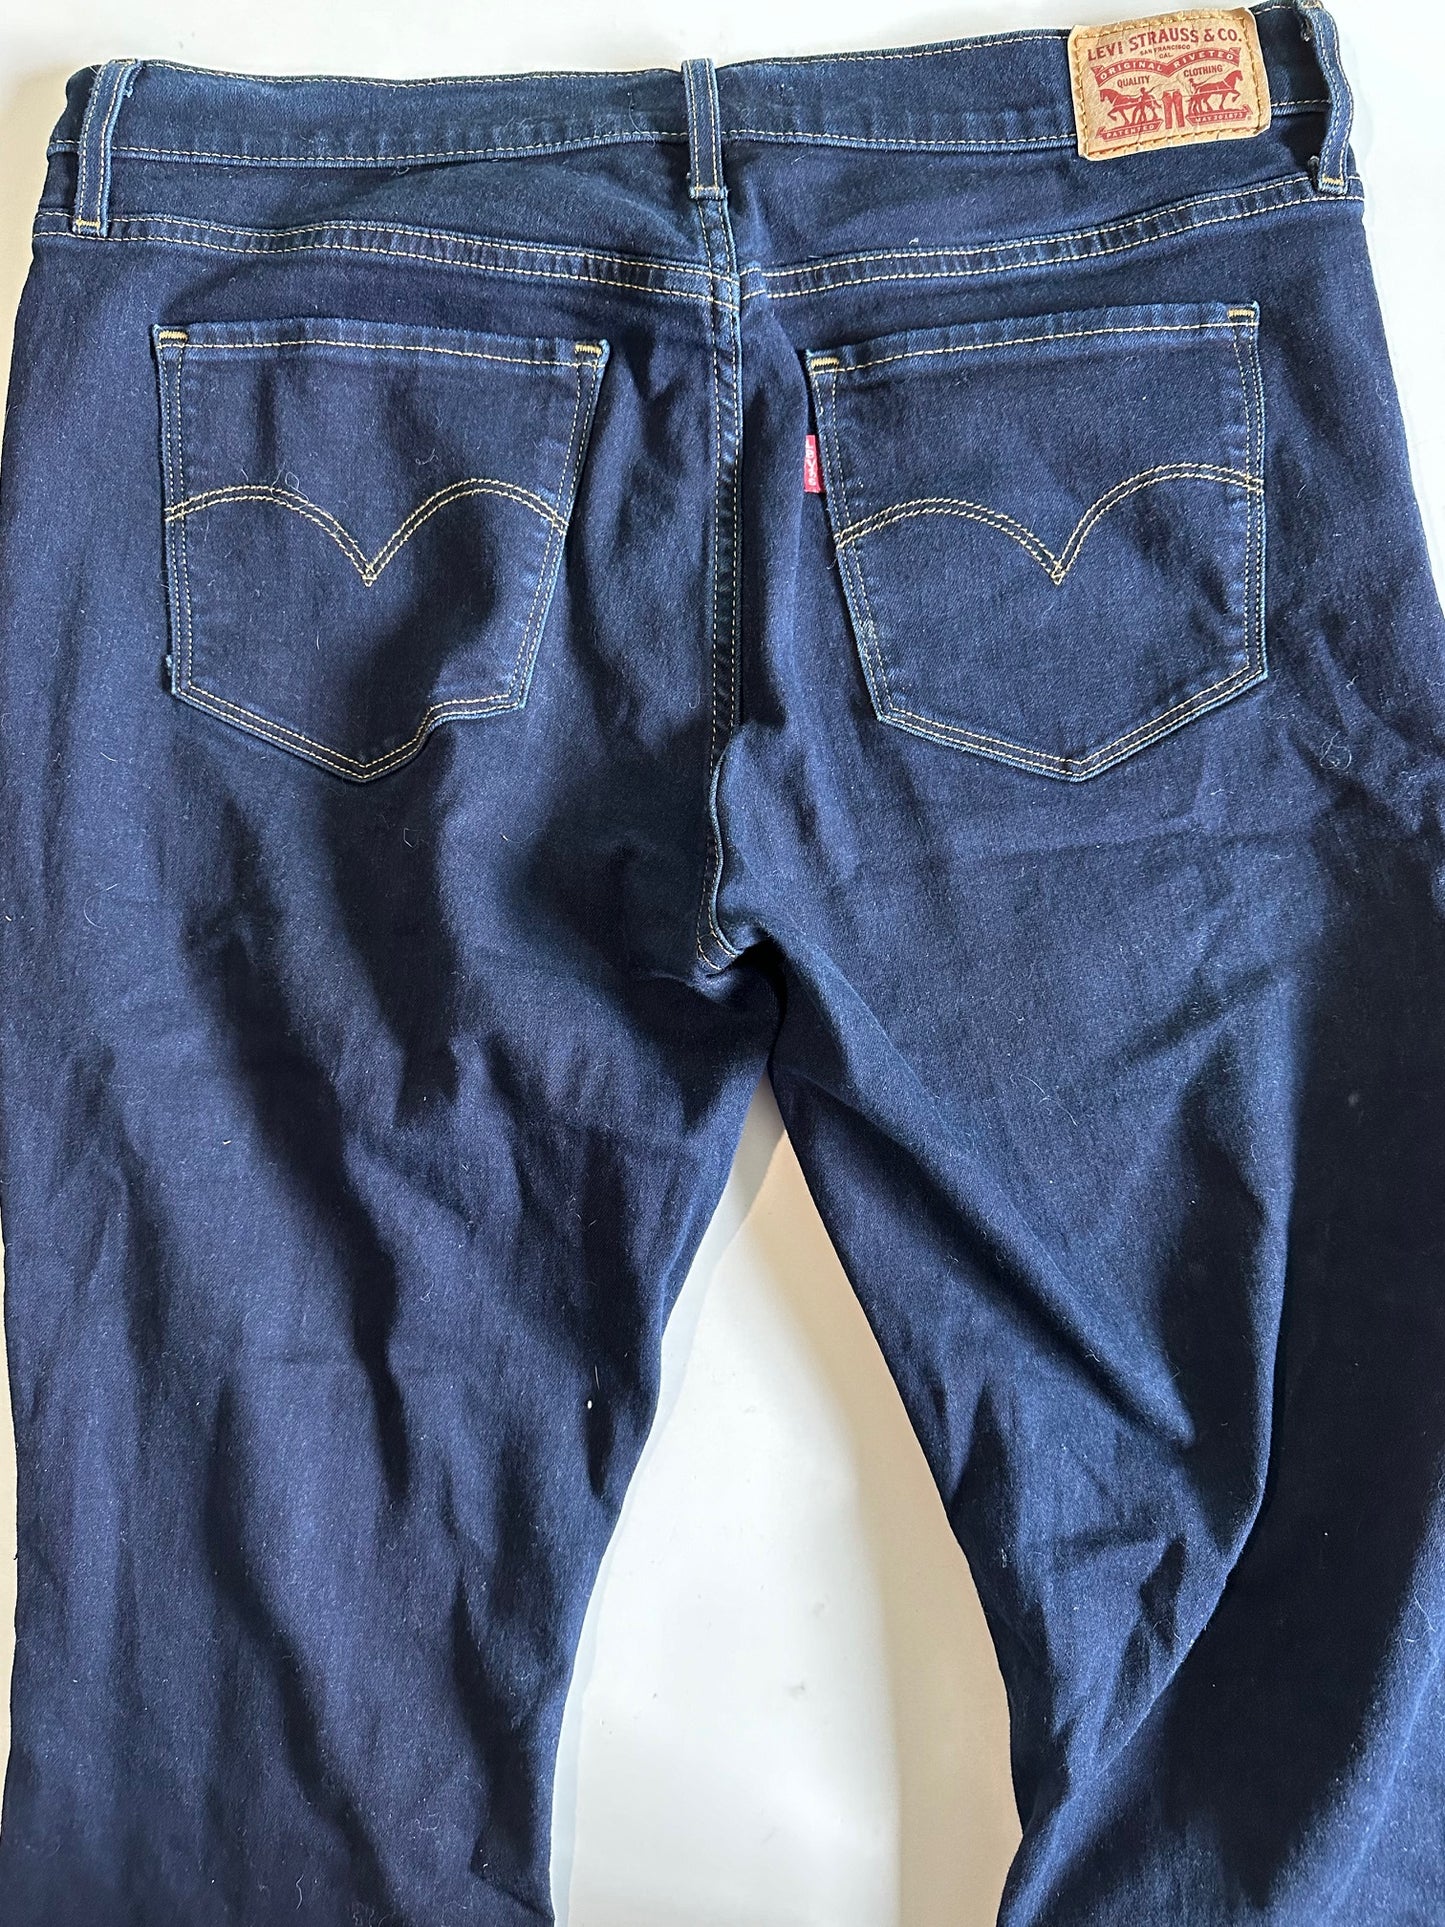 *Adult* Levi's, Shaping Bootcut Jeans - Size 32